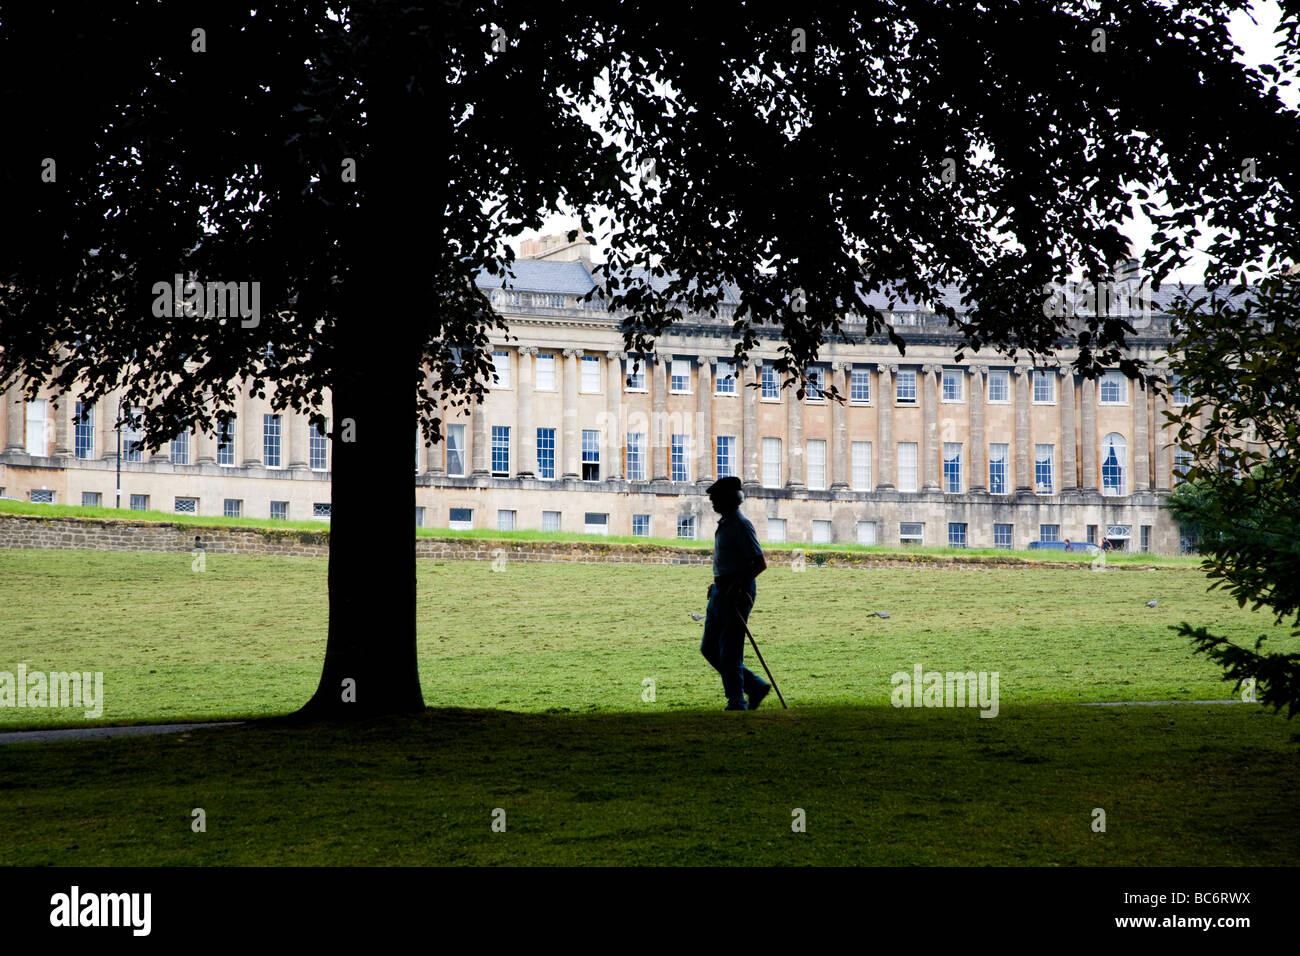 silhouette of a man walking in front of The Royal Crescent in Bath, england, WITH OPEN AREAS OF LAWN AND TREES Stock Photo